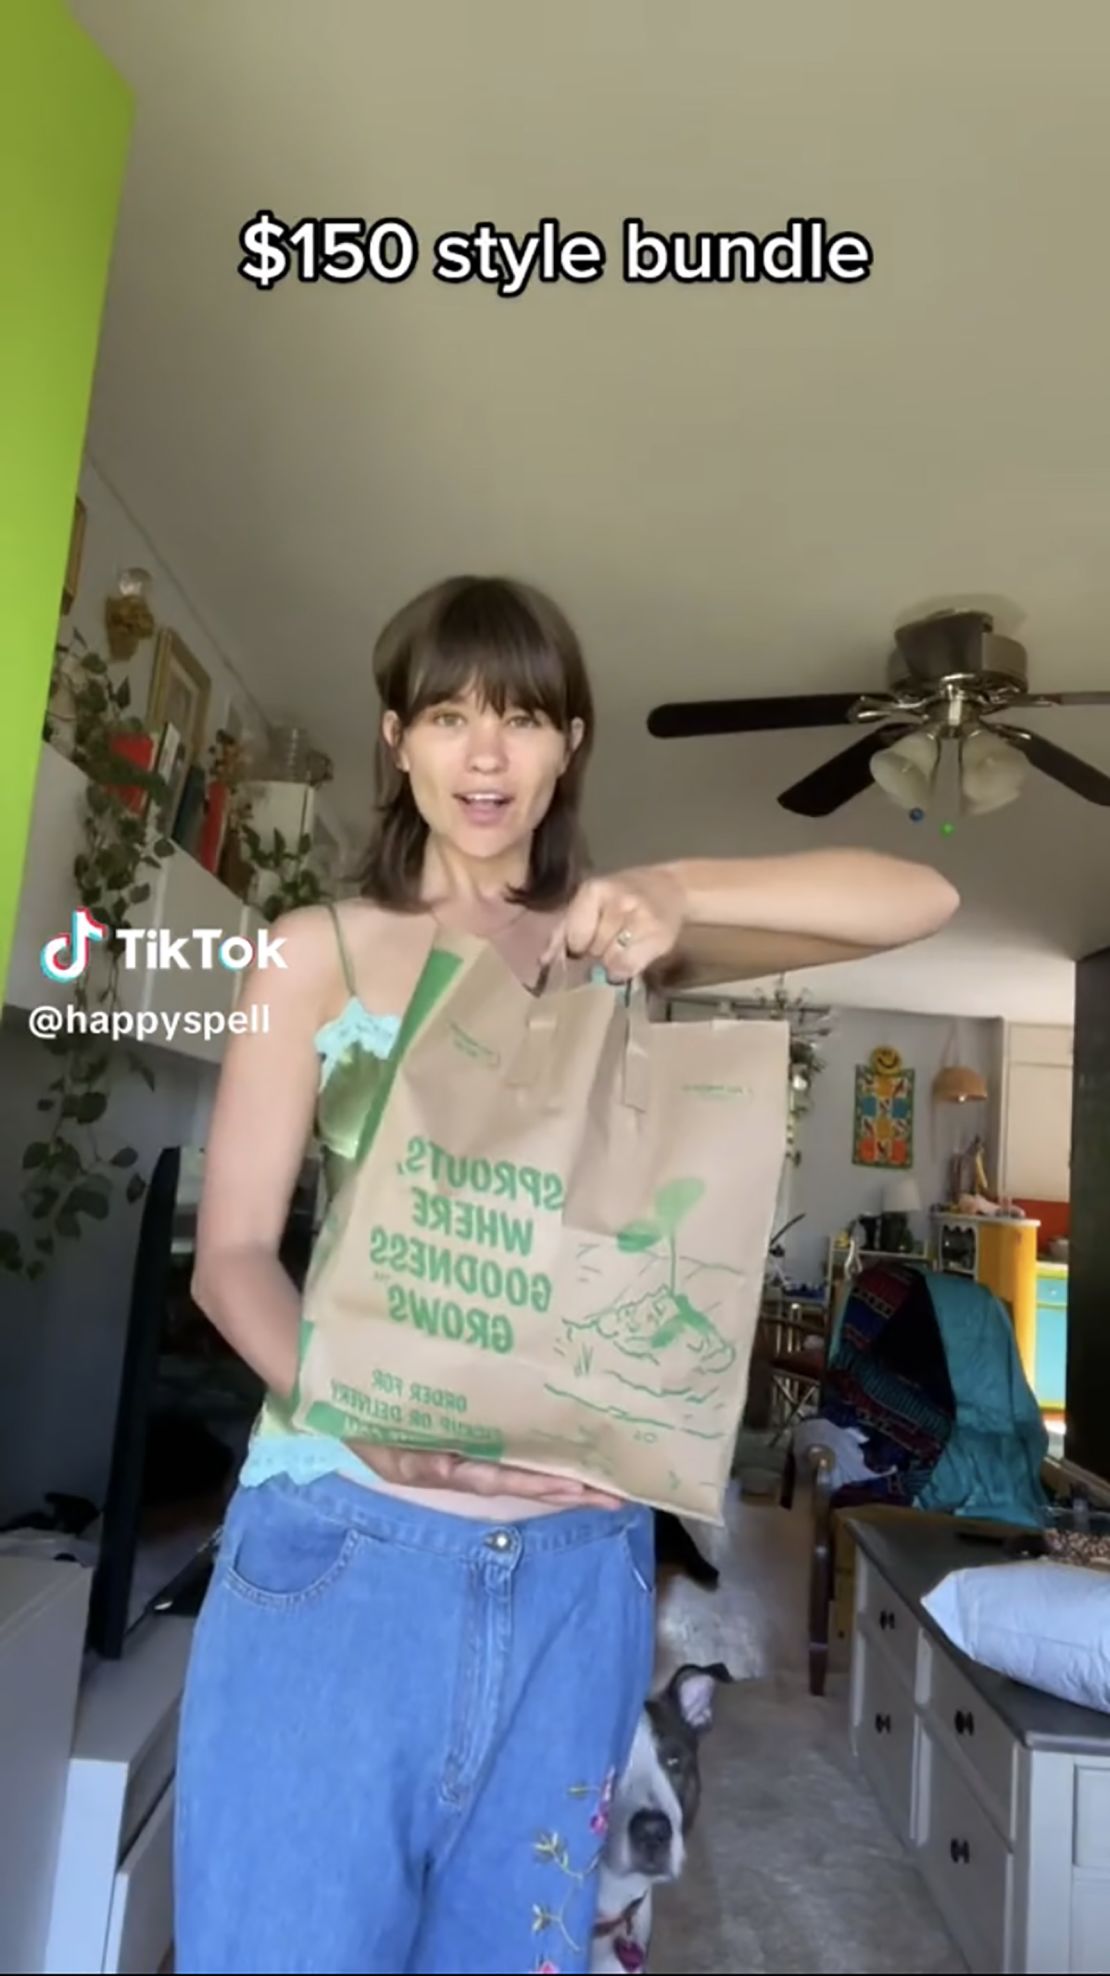 Micah Russell documents her style bundle building routine on TikTok.